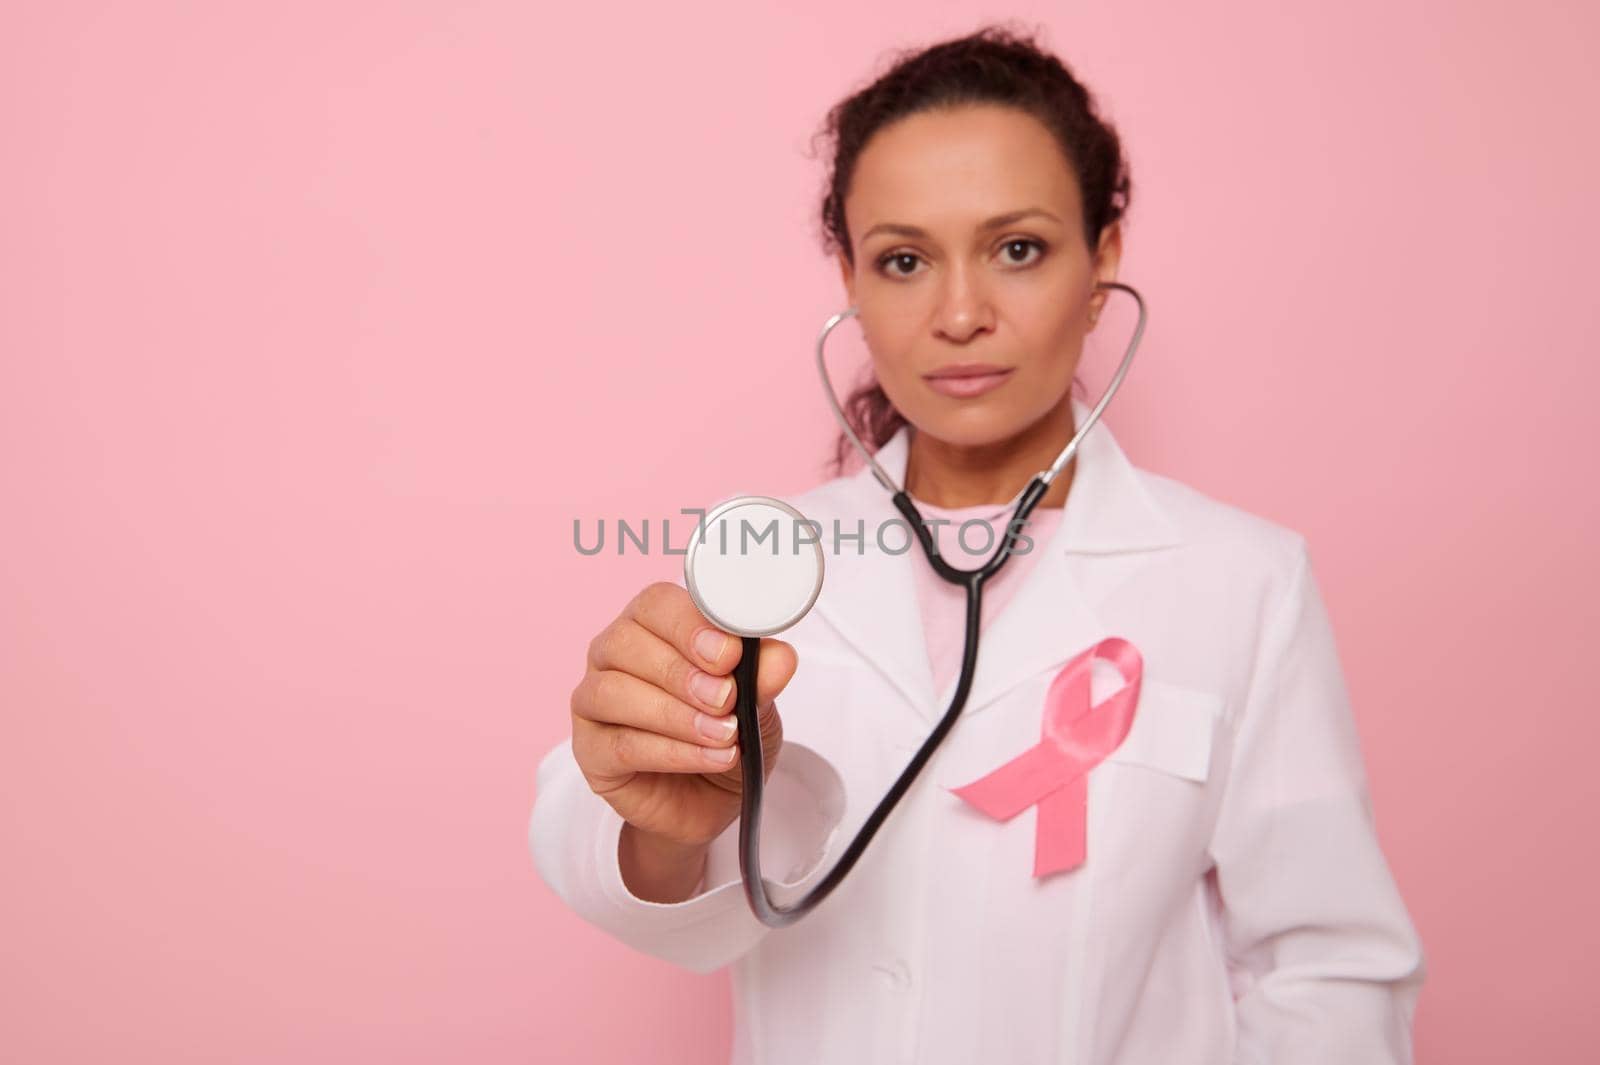 Focus on phonendoscope in the hands of beautiful mixed race Hispanic doctor in medical coat with pink satin ribbon, symbol of Global Breast Cancer awareness Day, Pink October . Woman's health concept